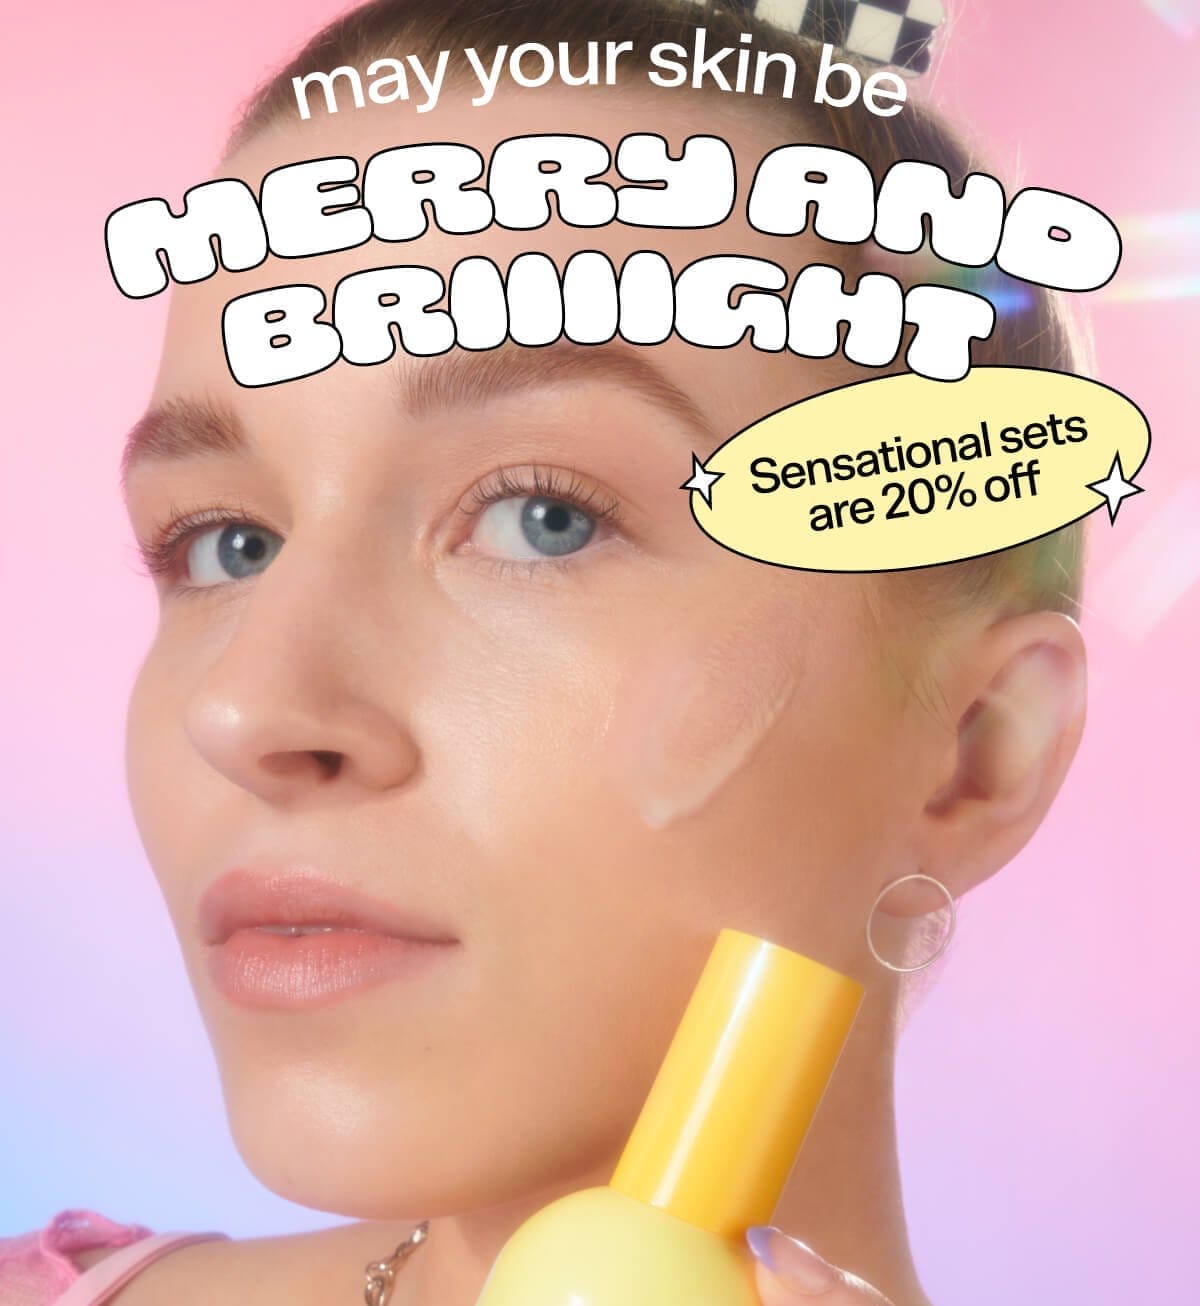 🎶May Your Skin be Merry and Briiiight 🎶 Sensational sets are 20% off